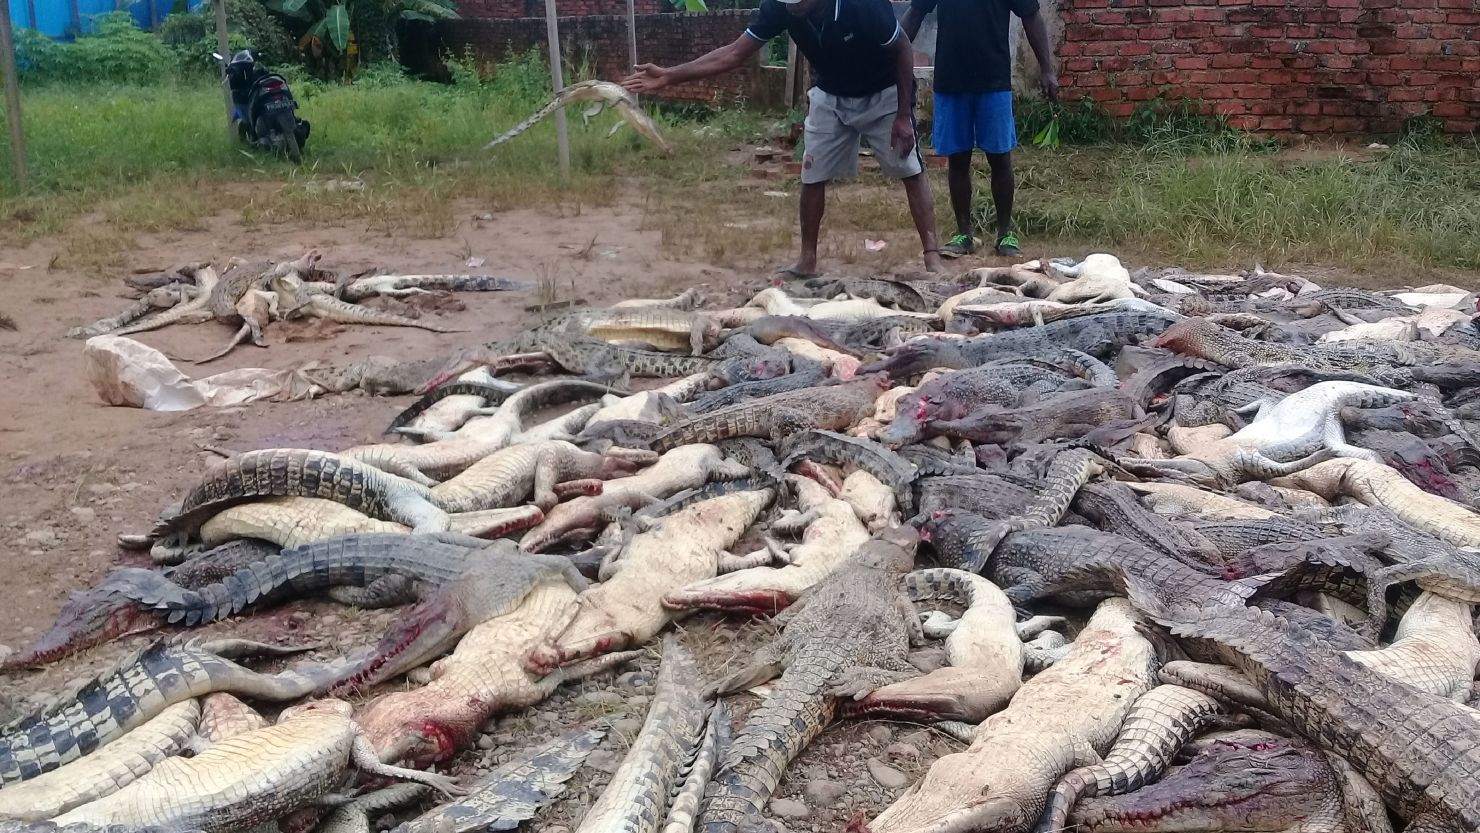 A photo taken Saturday shows two men standing among the dead crocodiles in West Papua province.